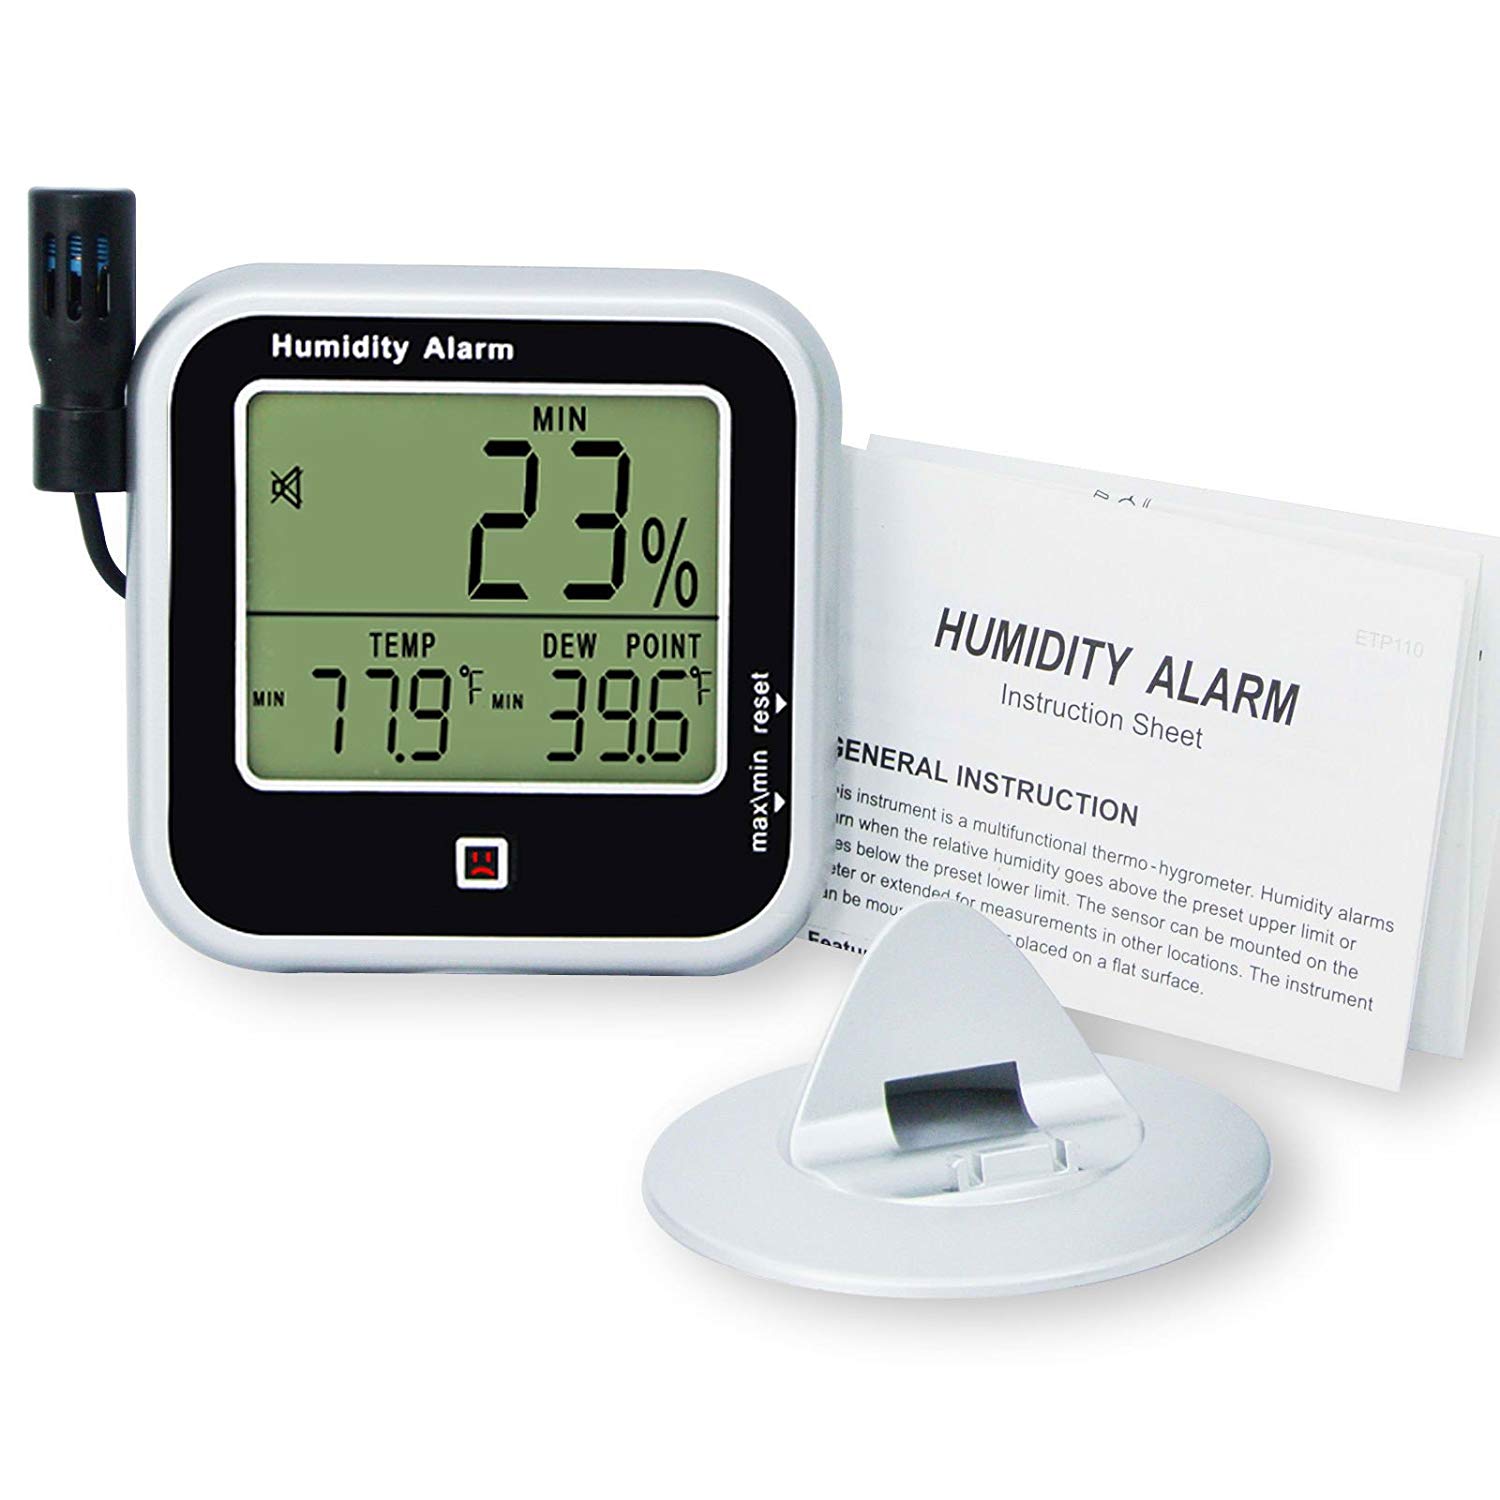 One type of temperature and relative humidity monitoring device to assess the storage environment for optical discs.